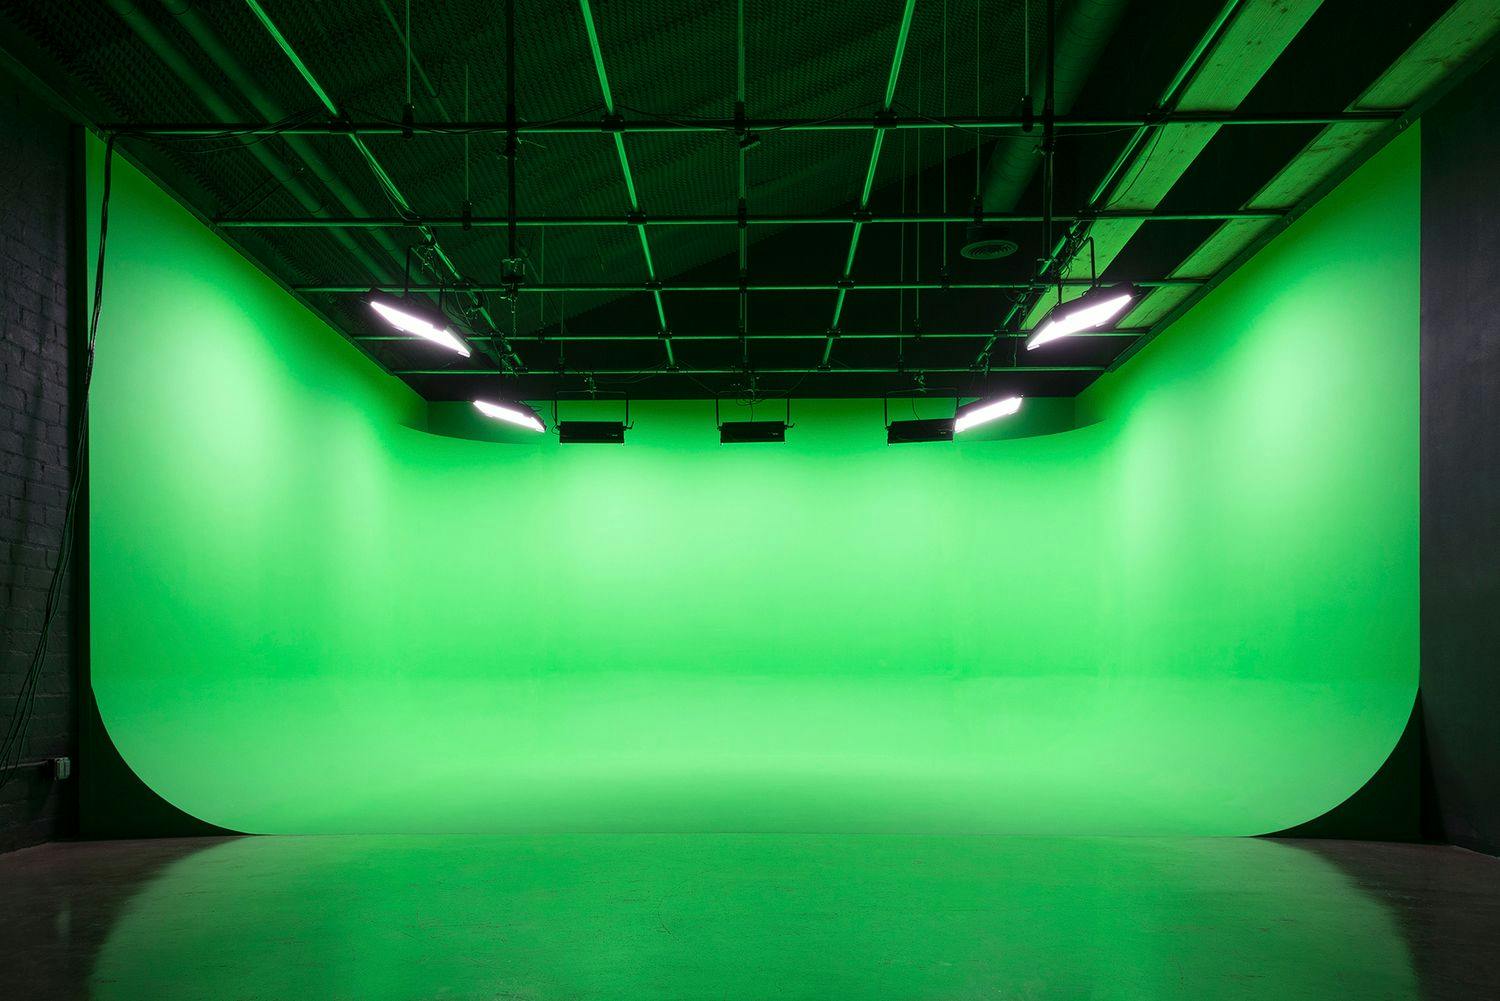  A brightly lit studio with green screen cyclorama for chroma key video production and professional lighting equipment overhead.